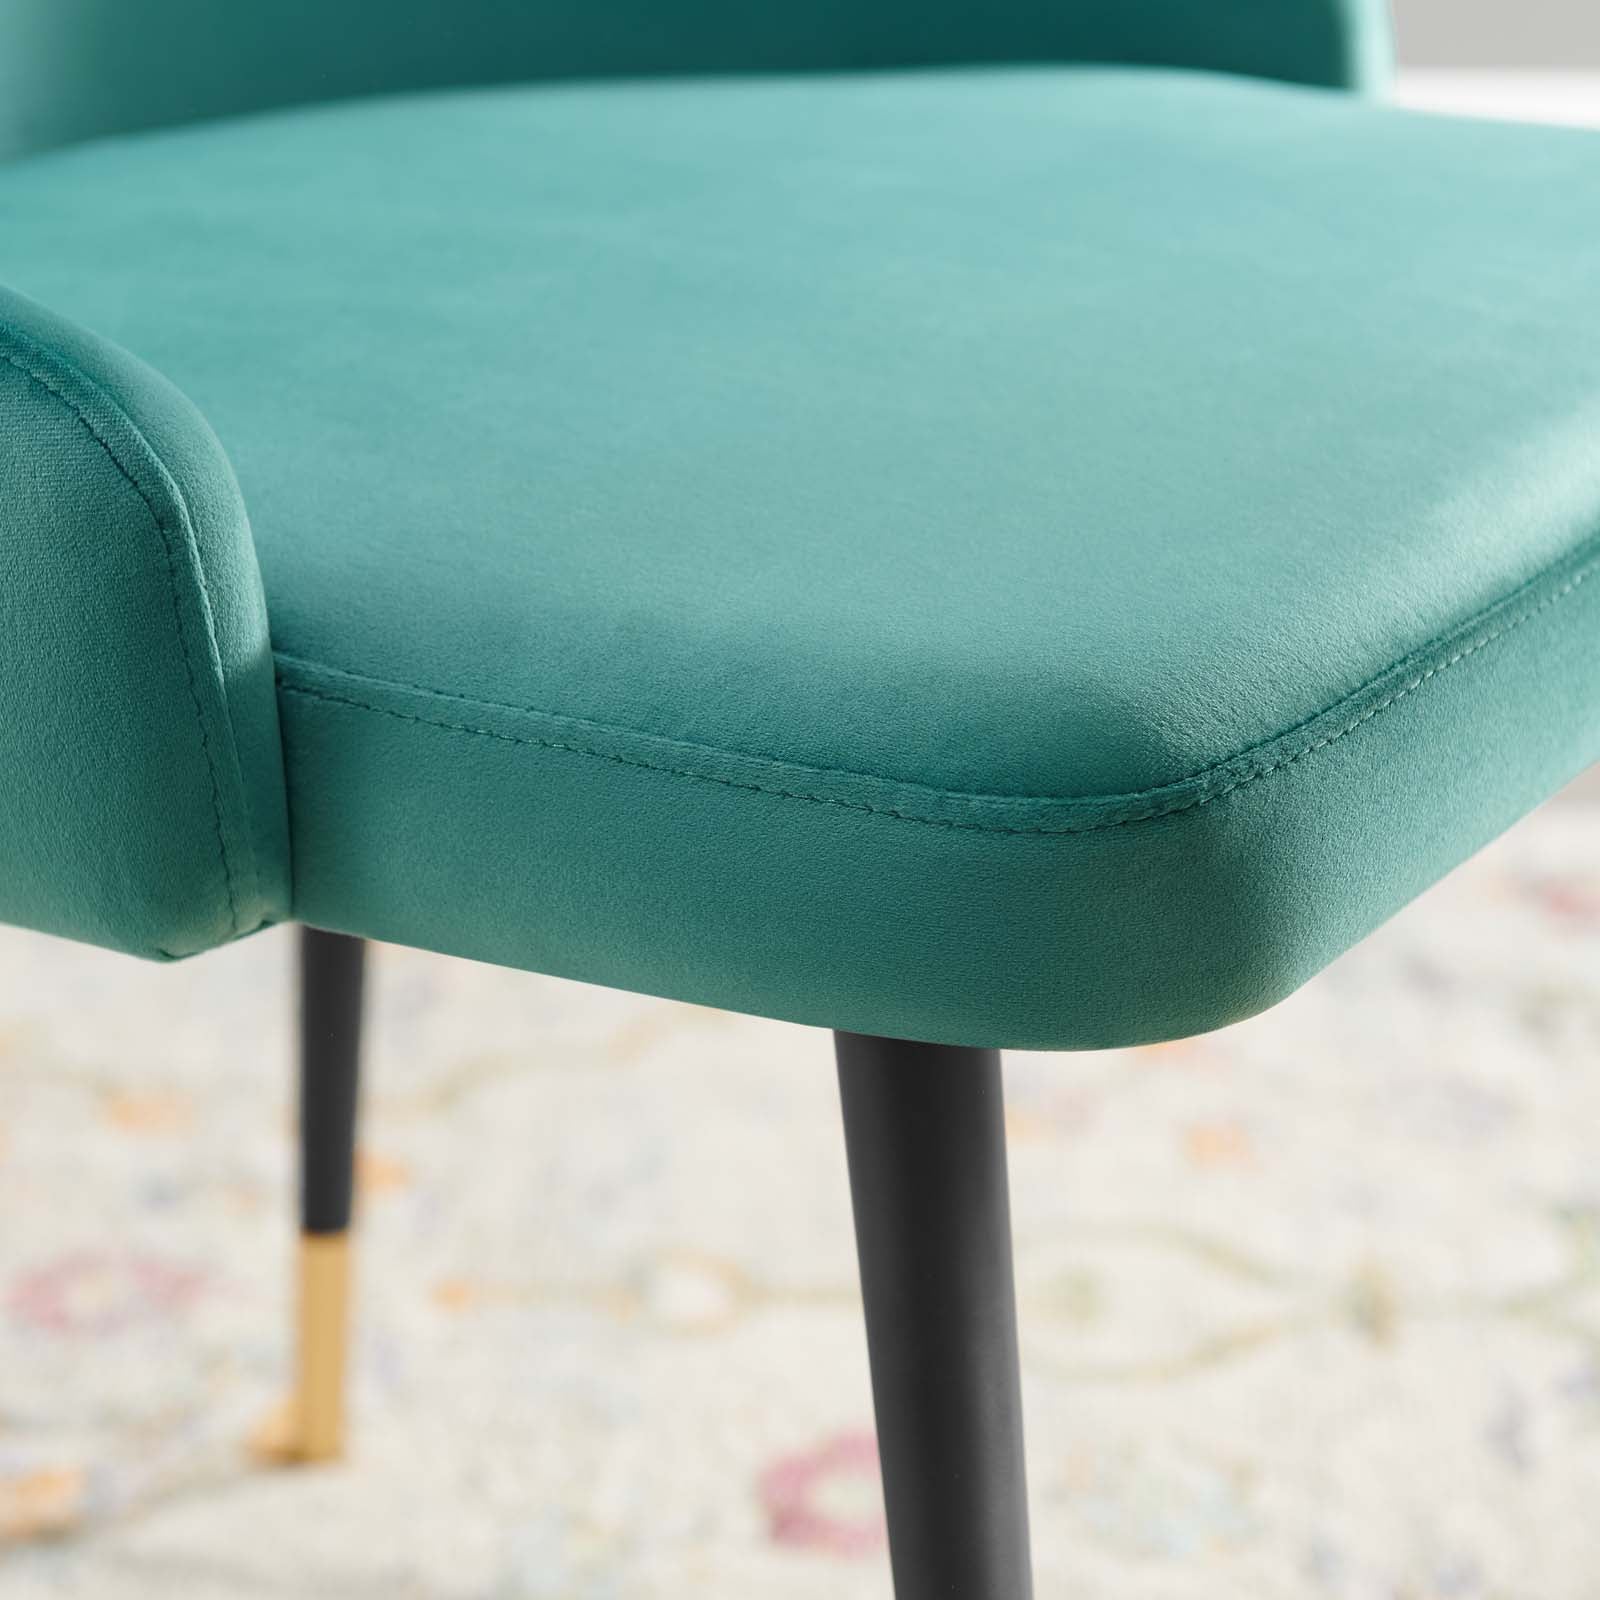 Modway Dining Chairs - Adorn Tufted Performance Velvet Dining Side Chair Teal